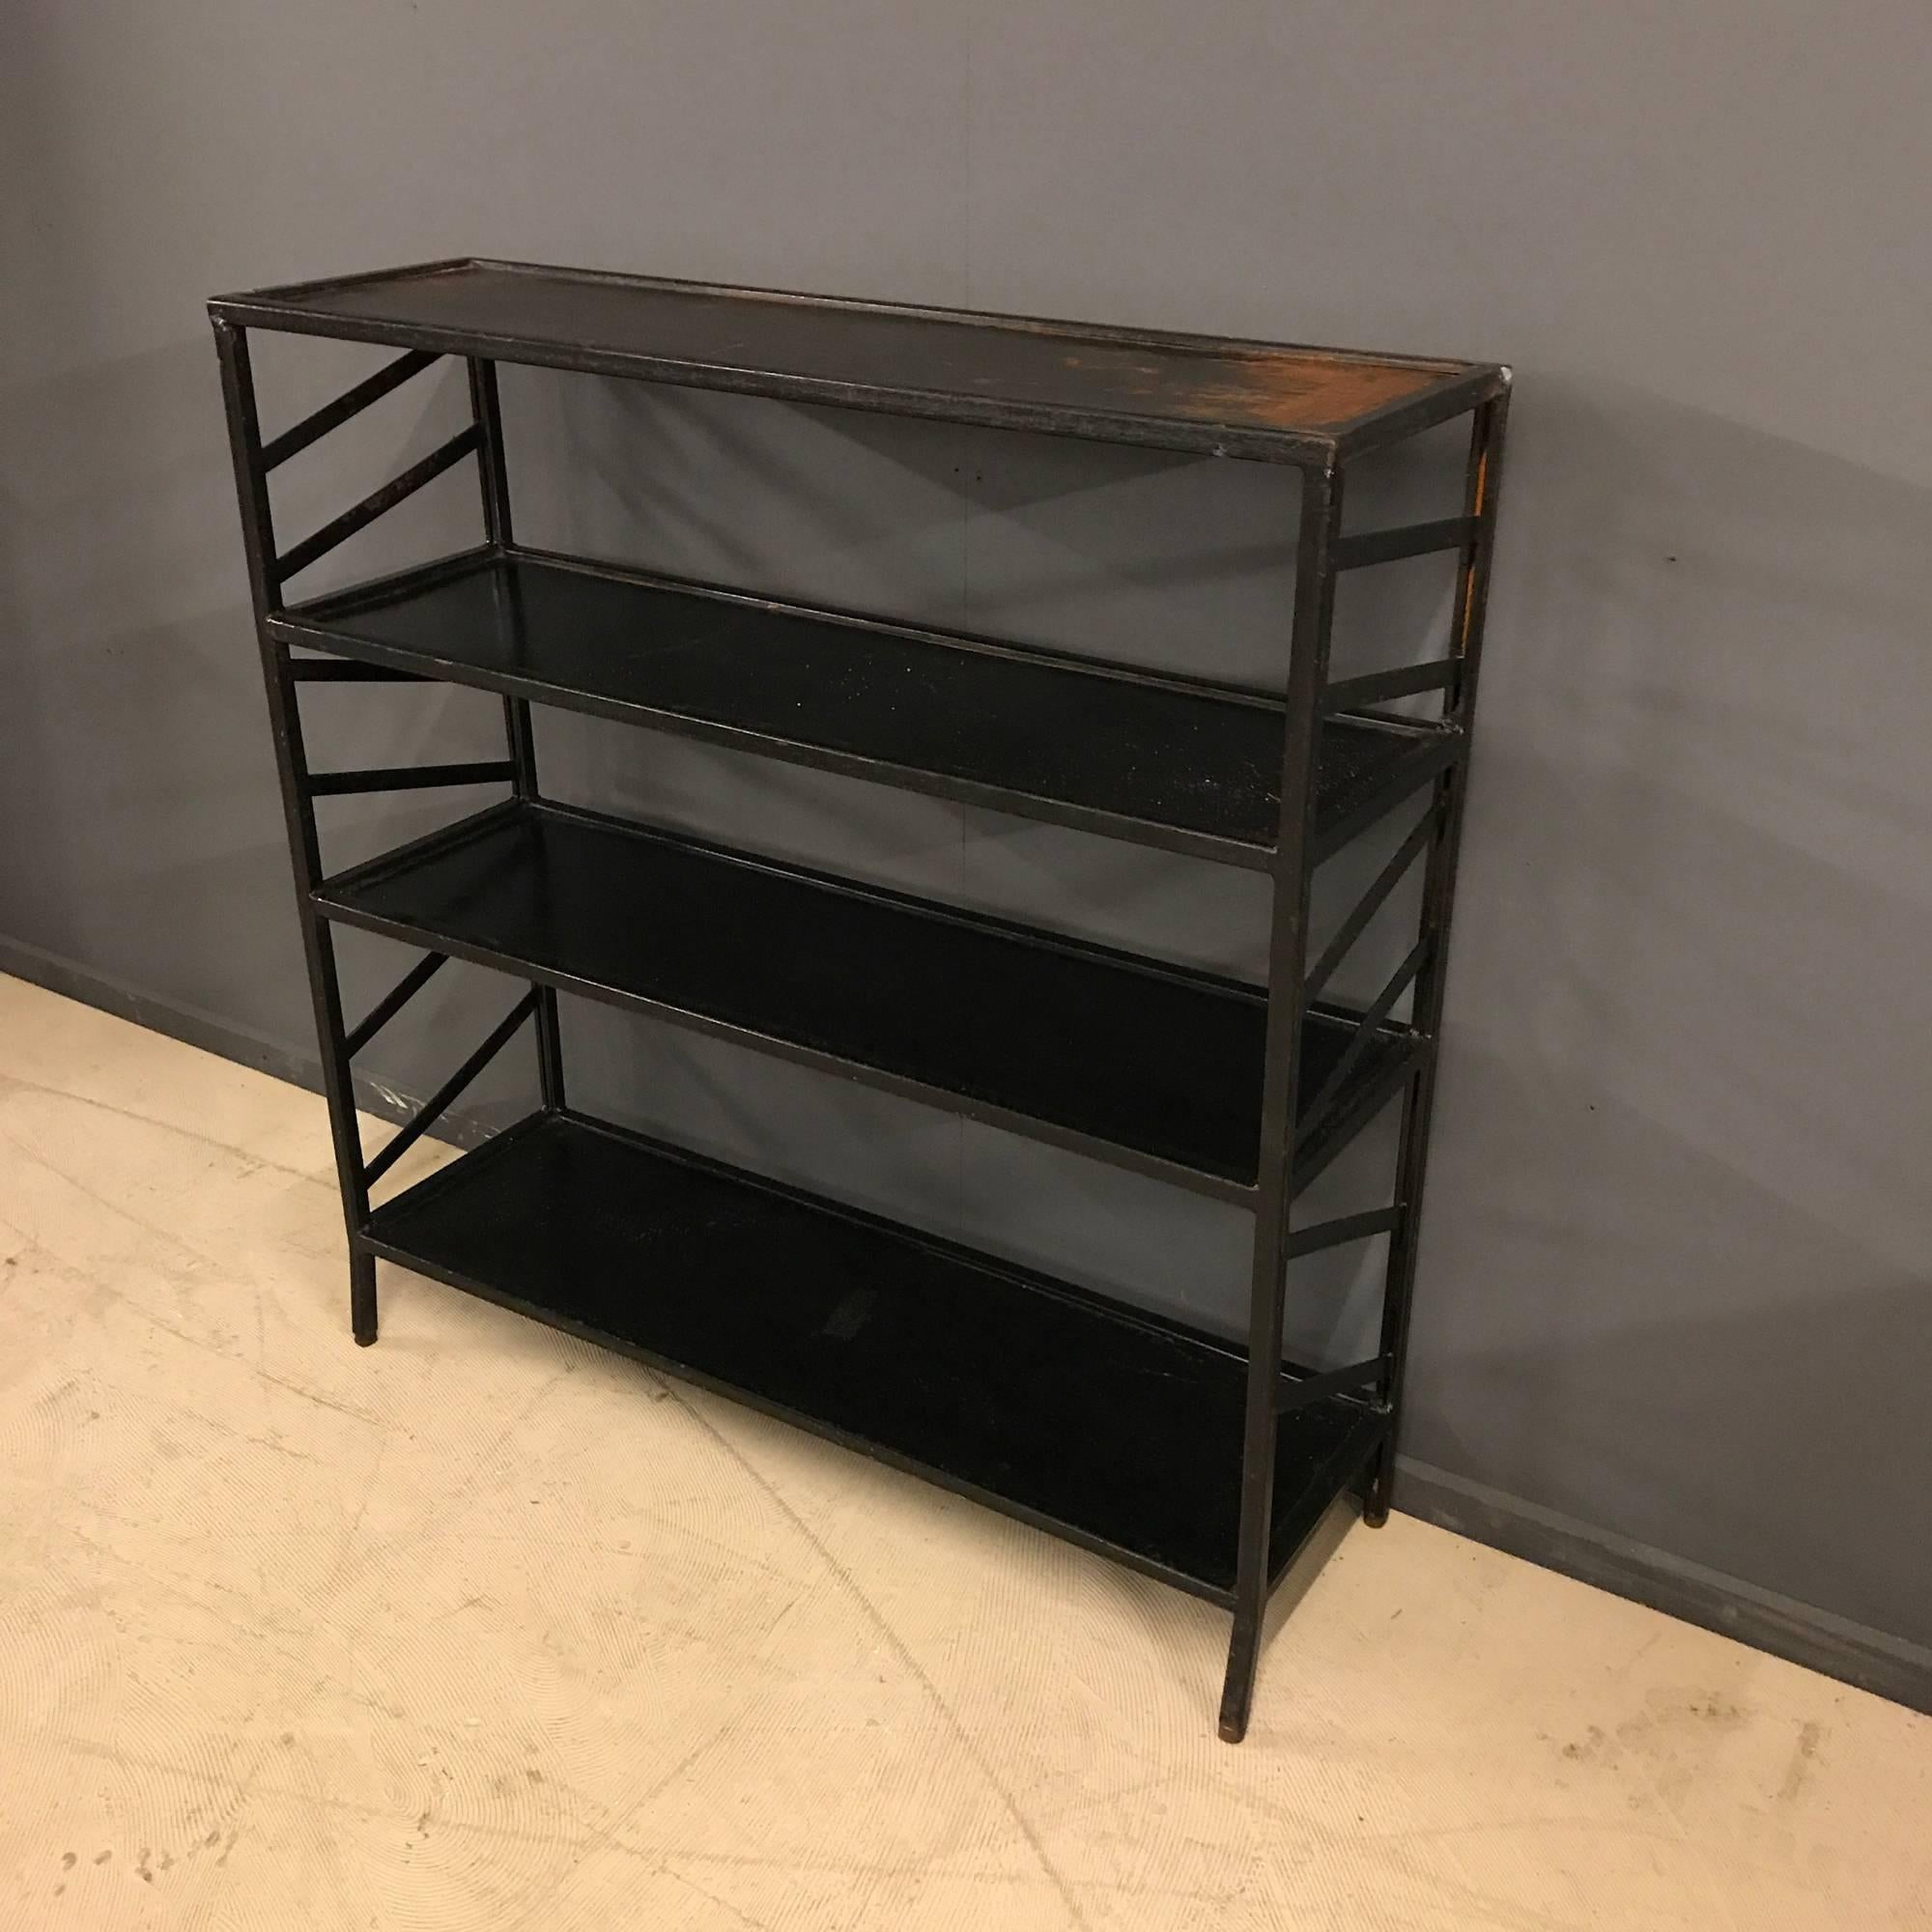 This black metal rack was used for storage in a factory. Made in Belgium during the 1920s. Nice size and good patina.